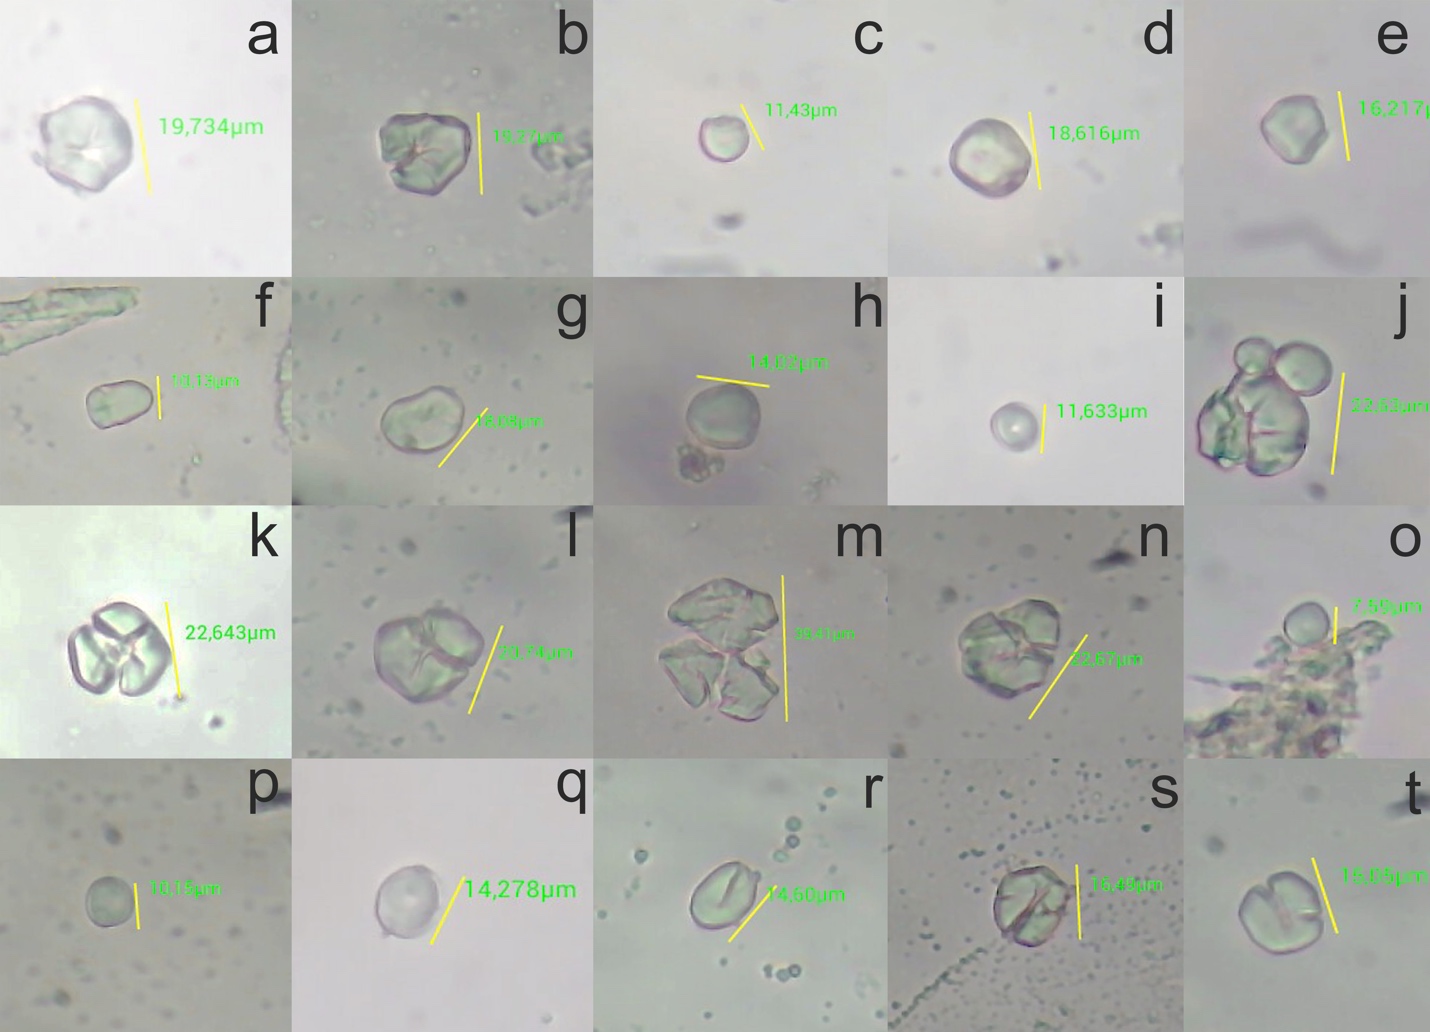 A collage of images of cells

Description automatically generated